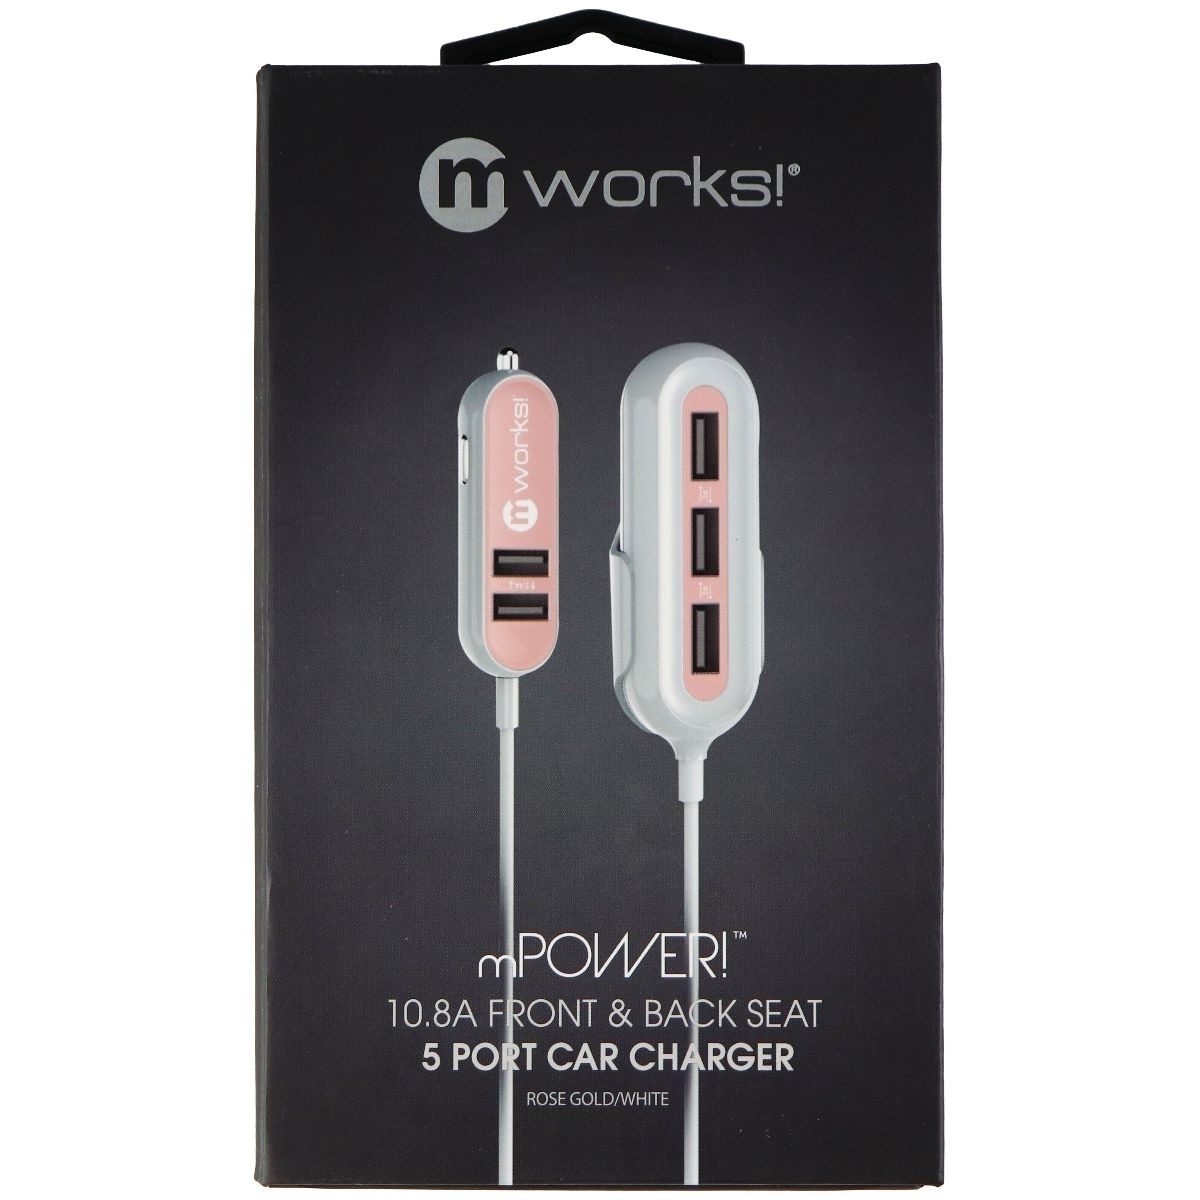 MWorks! MPOWER! 10.8A Front & Back Seat 5 Port Car Charger - Rose Gold/White